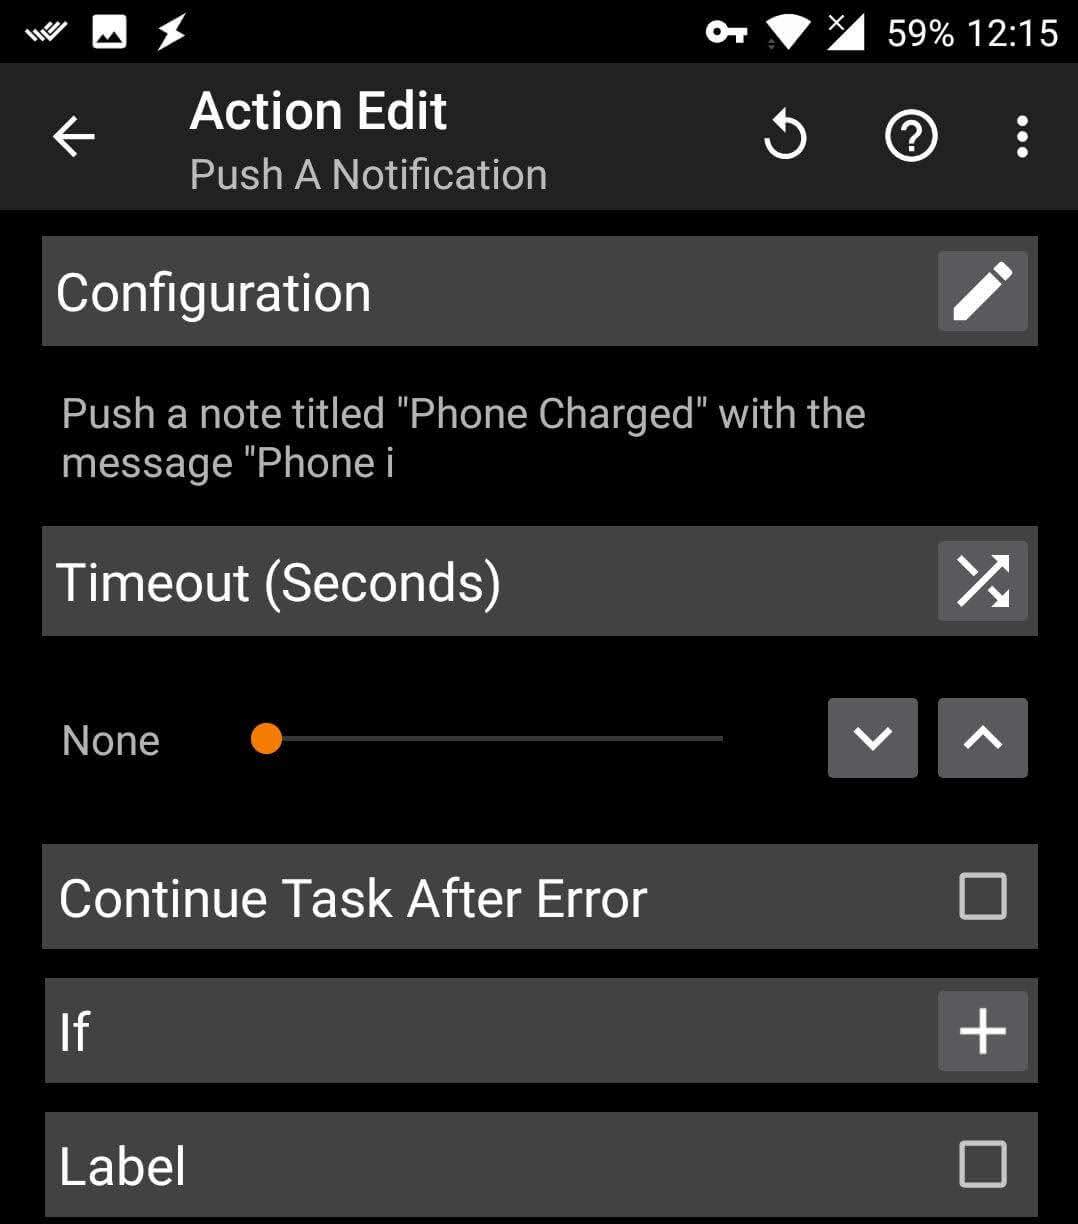 Tasker action edit with Pushbullet